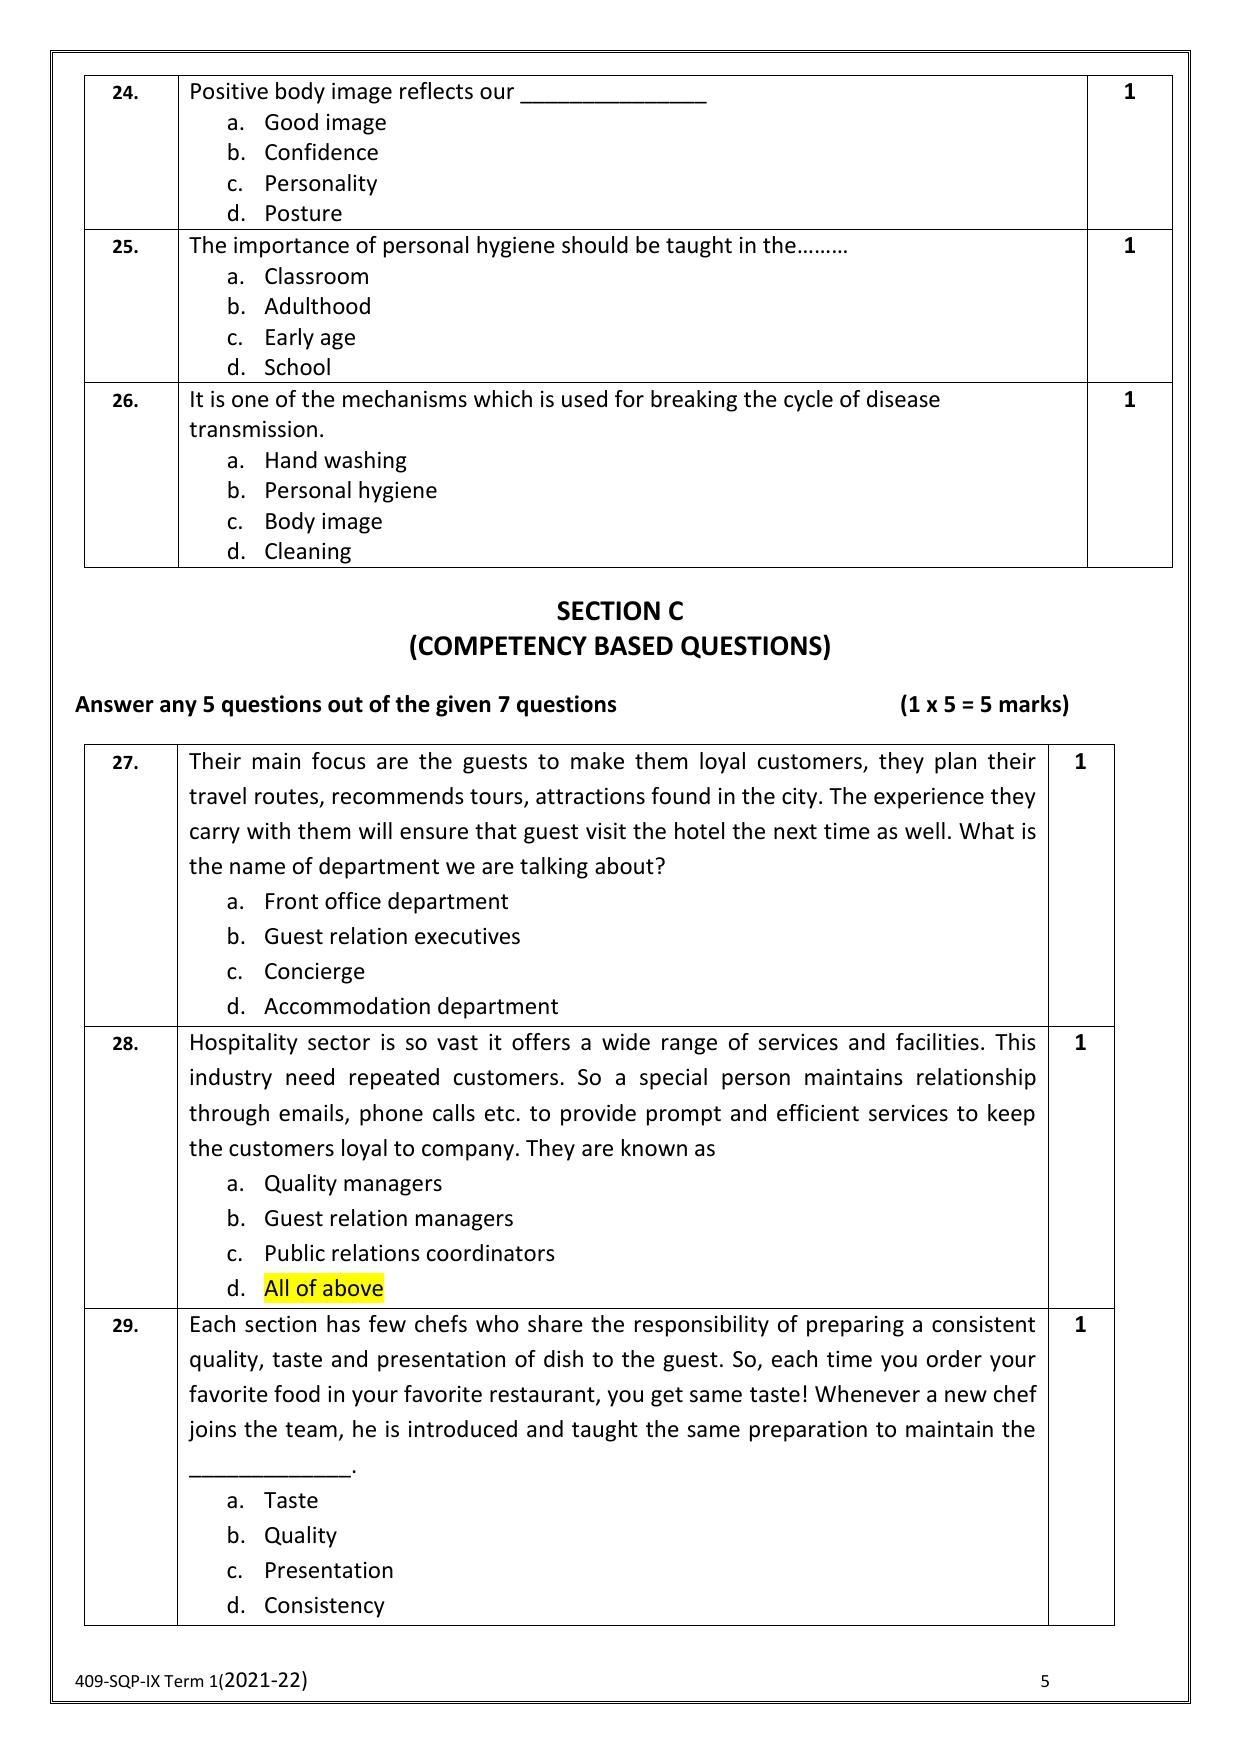 CBSE Class 10 Skill Education (Term I) - Food Production Sample Paper 2021-22 - Page 5